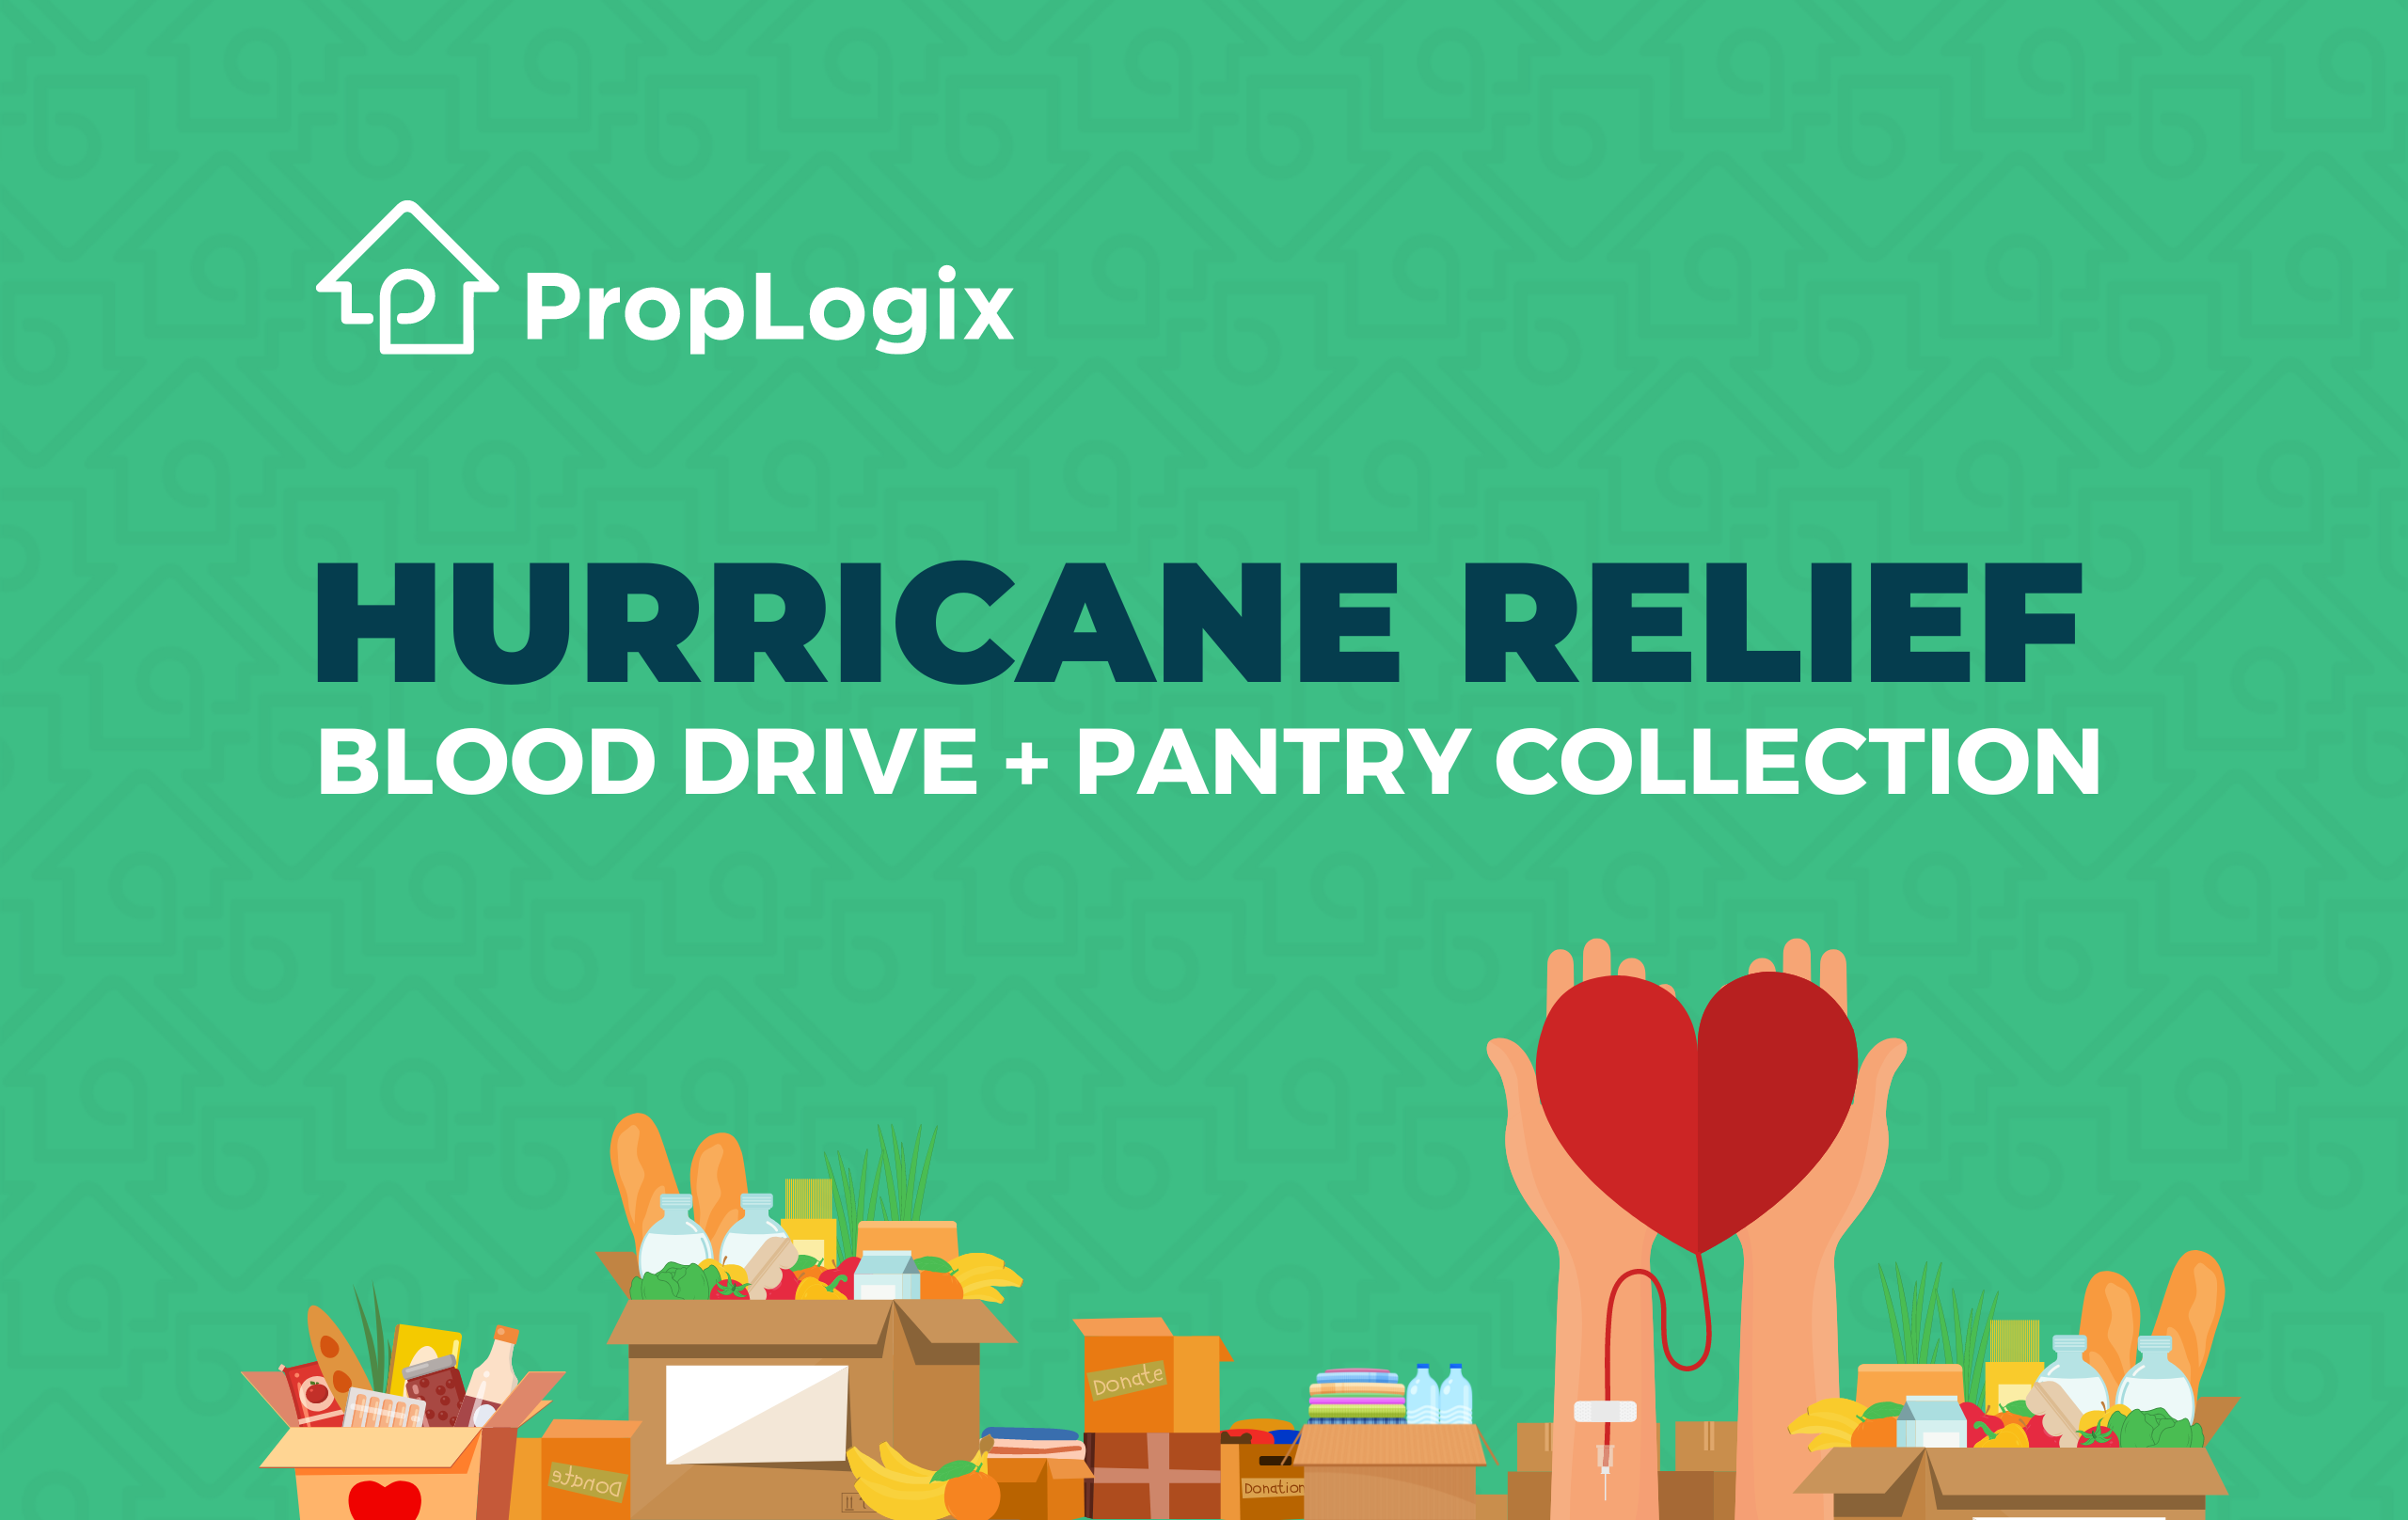 Relief Efforts For Those Impacted by Hurricane Ian